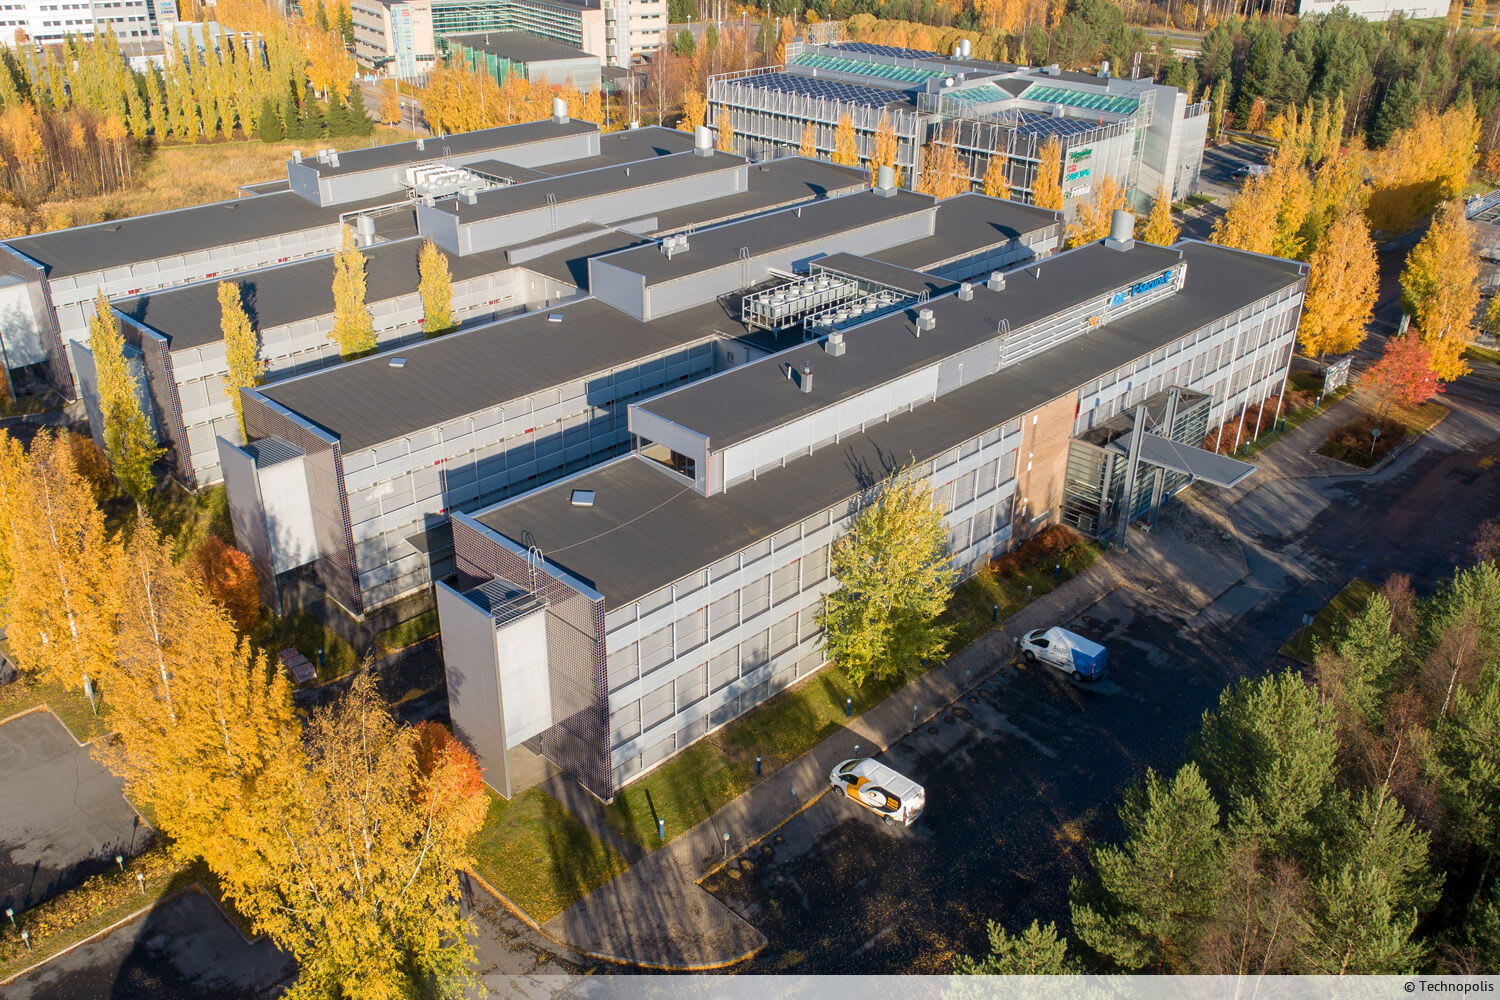 A 1st floor storage space available for lease at Technopolis Linnanmaa campus. Shared kitchen and toilet facilities are on the same floor.